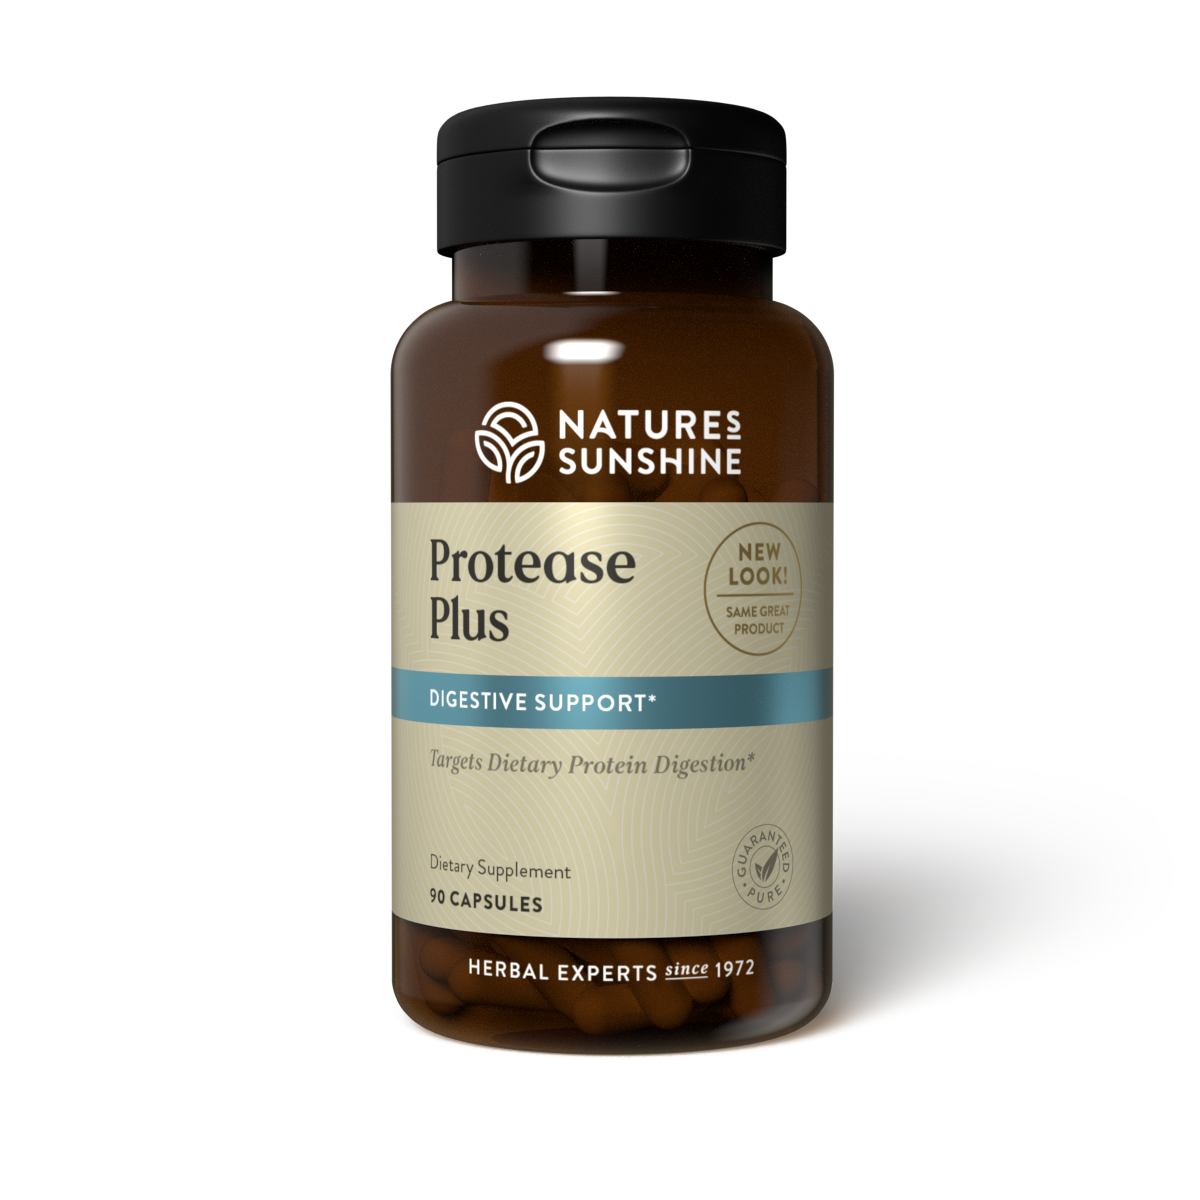 Protease Plus - SPECIAL OFFER